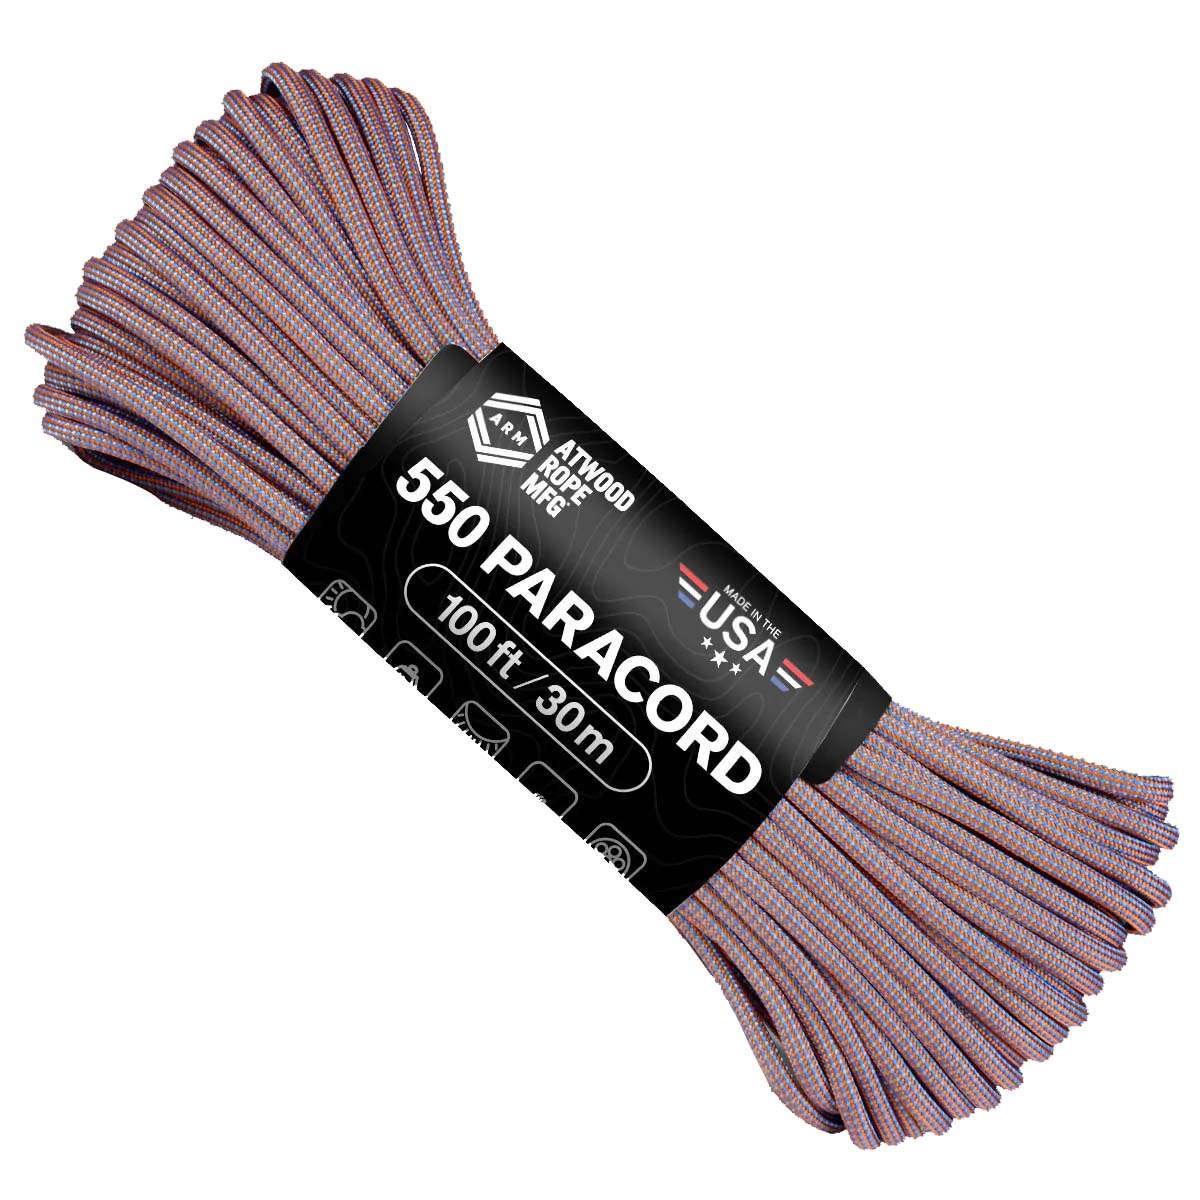 Atwood Paracord 550 7 Strand - 30m Lengths